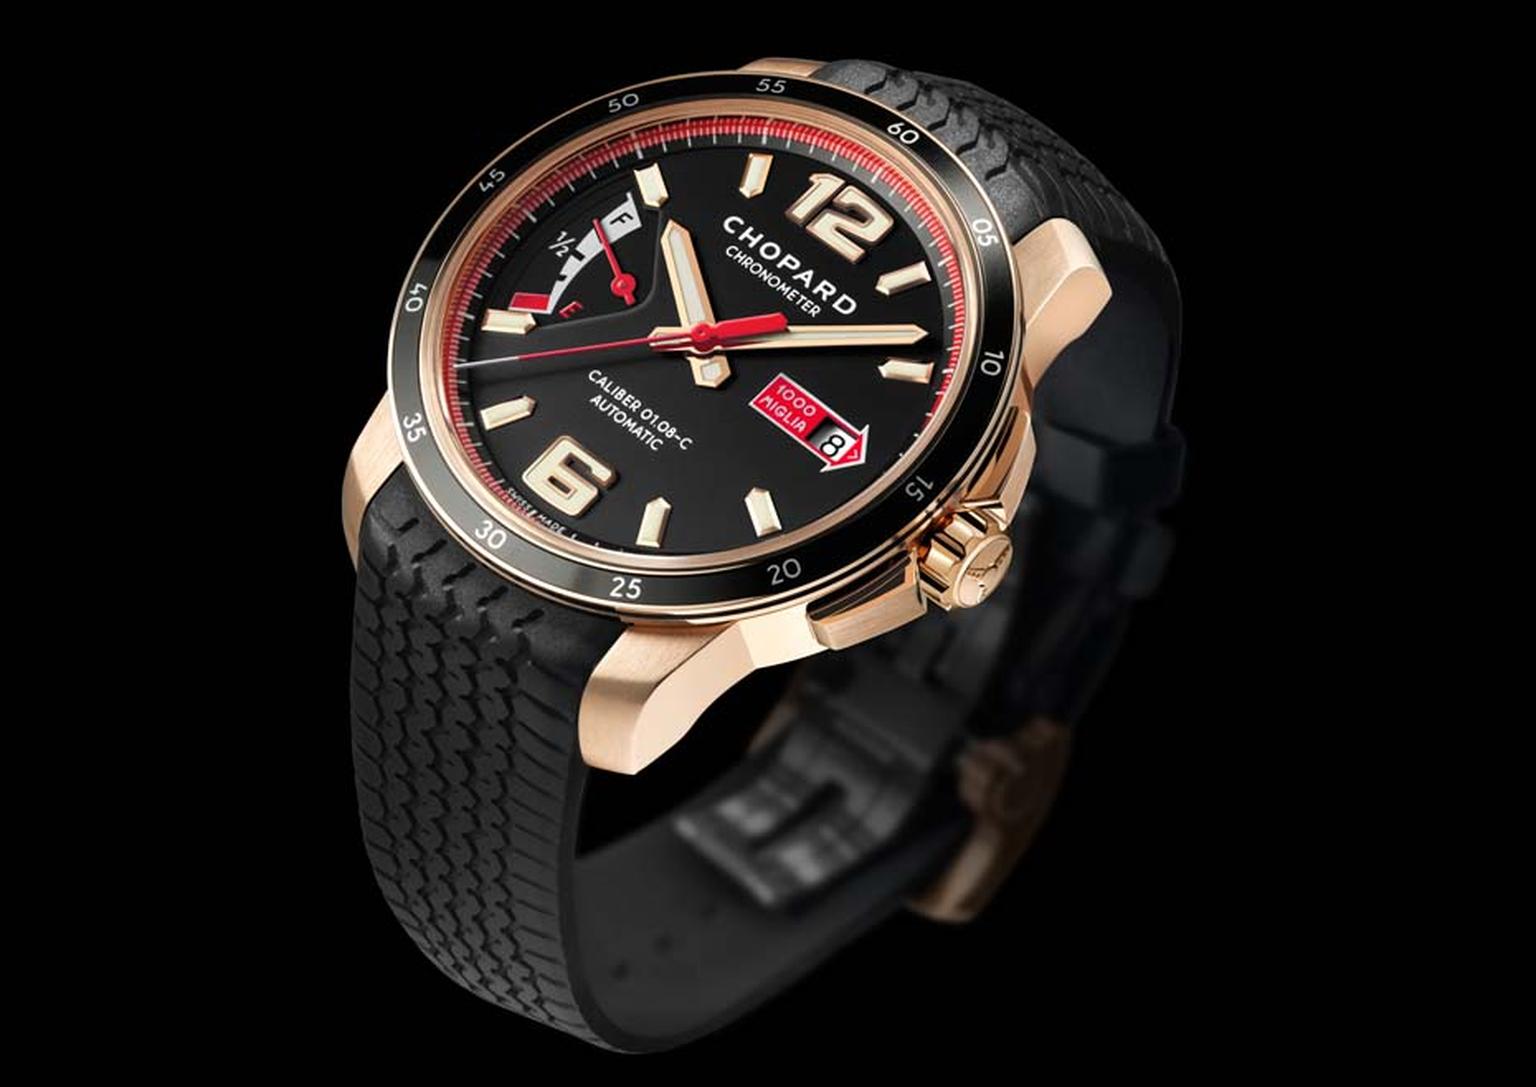 The Chopard Mille Miglia GTS Power Control watch, like all three models in the collection, is also available in a luxurious rose gold case with a black rubber strap that emulates the tread found on Dunlop tyres of the 1960s.